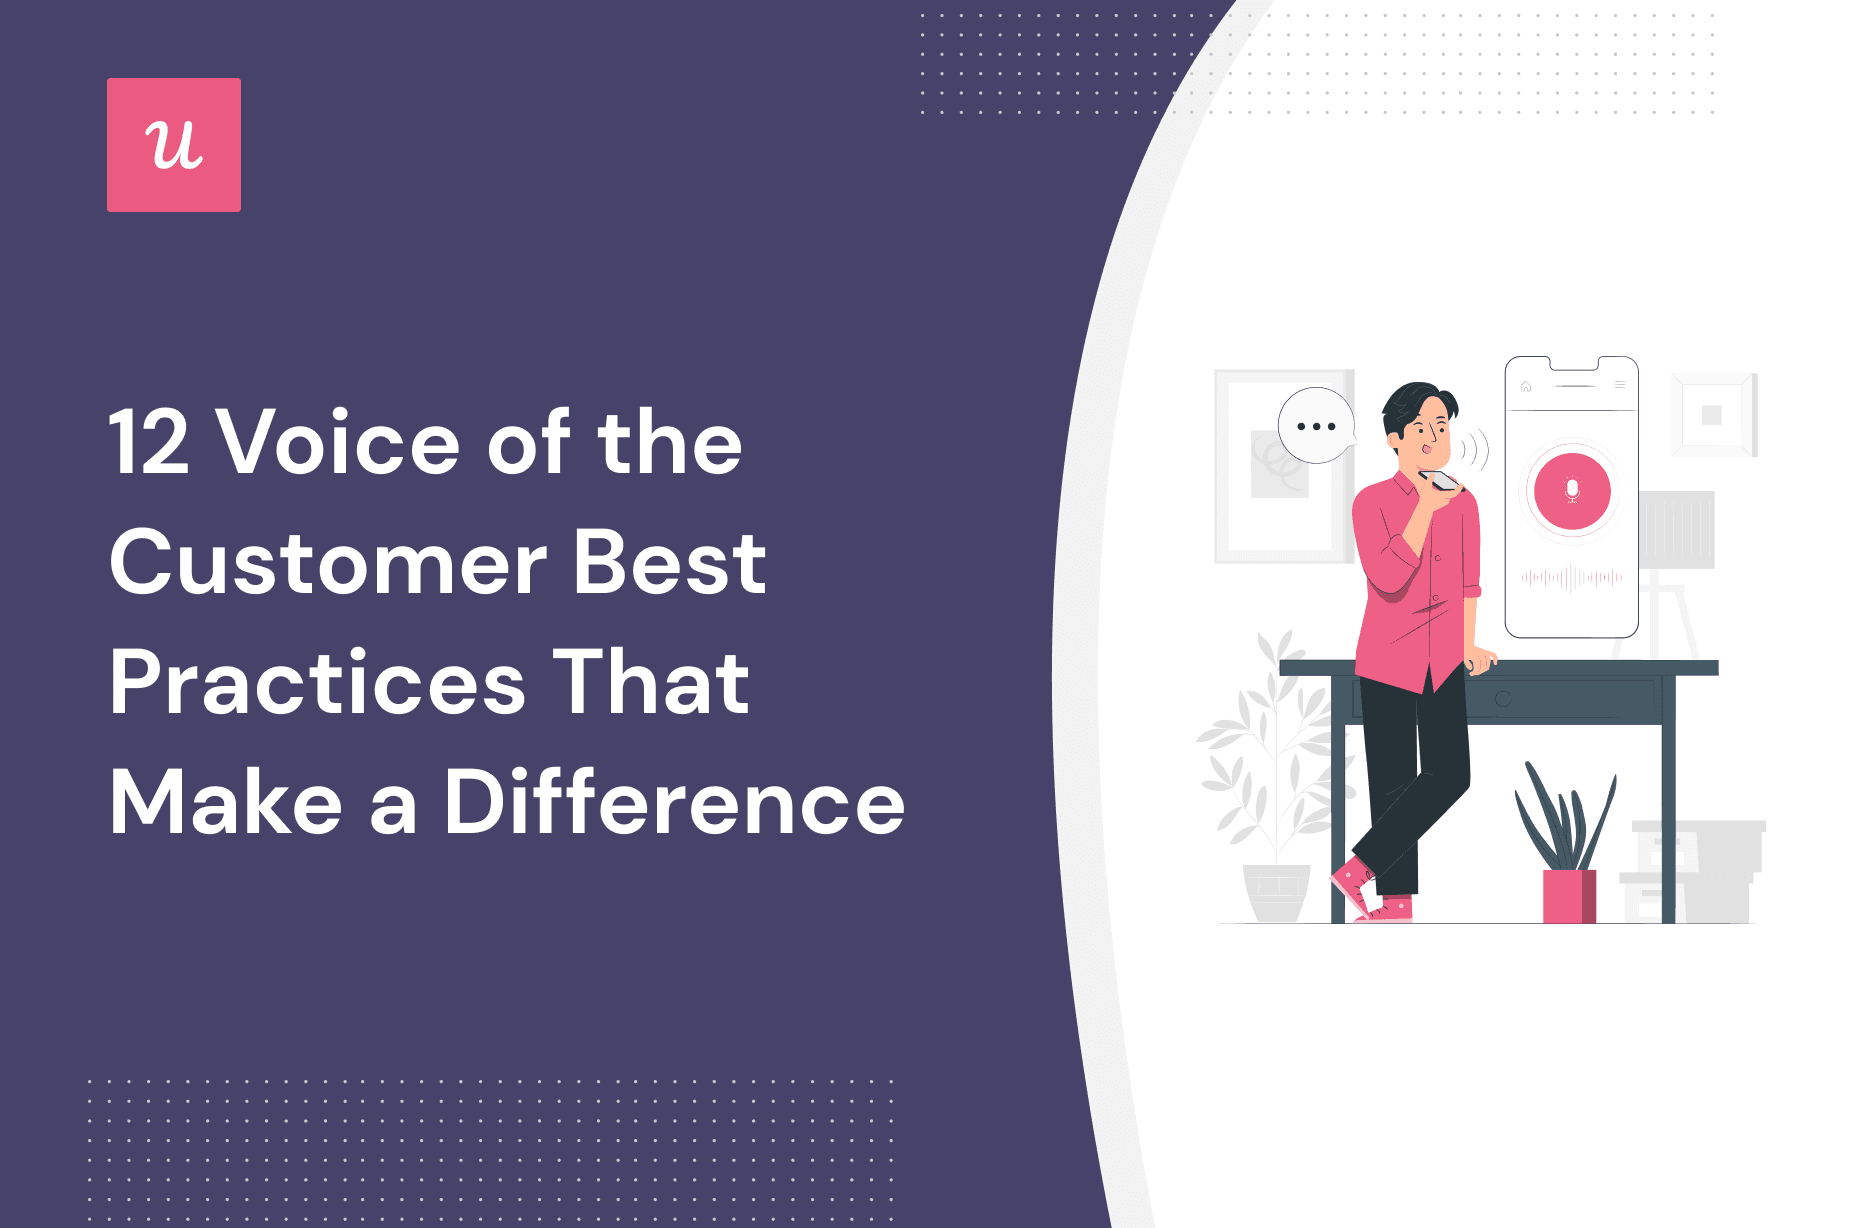 12 Voice of the Customer Best Practices That Make a Difference cover